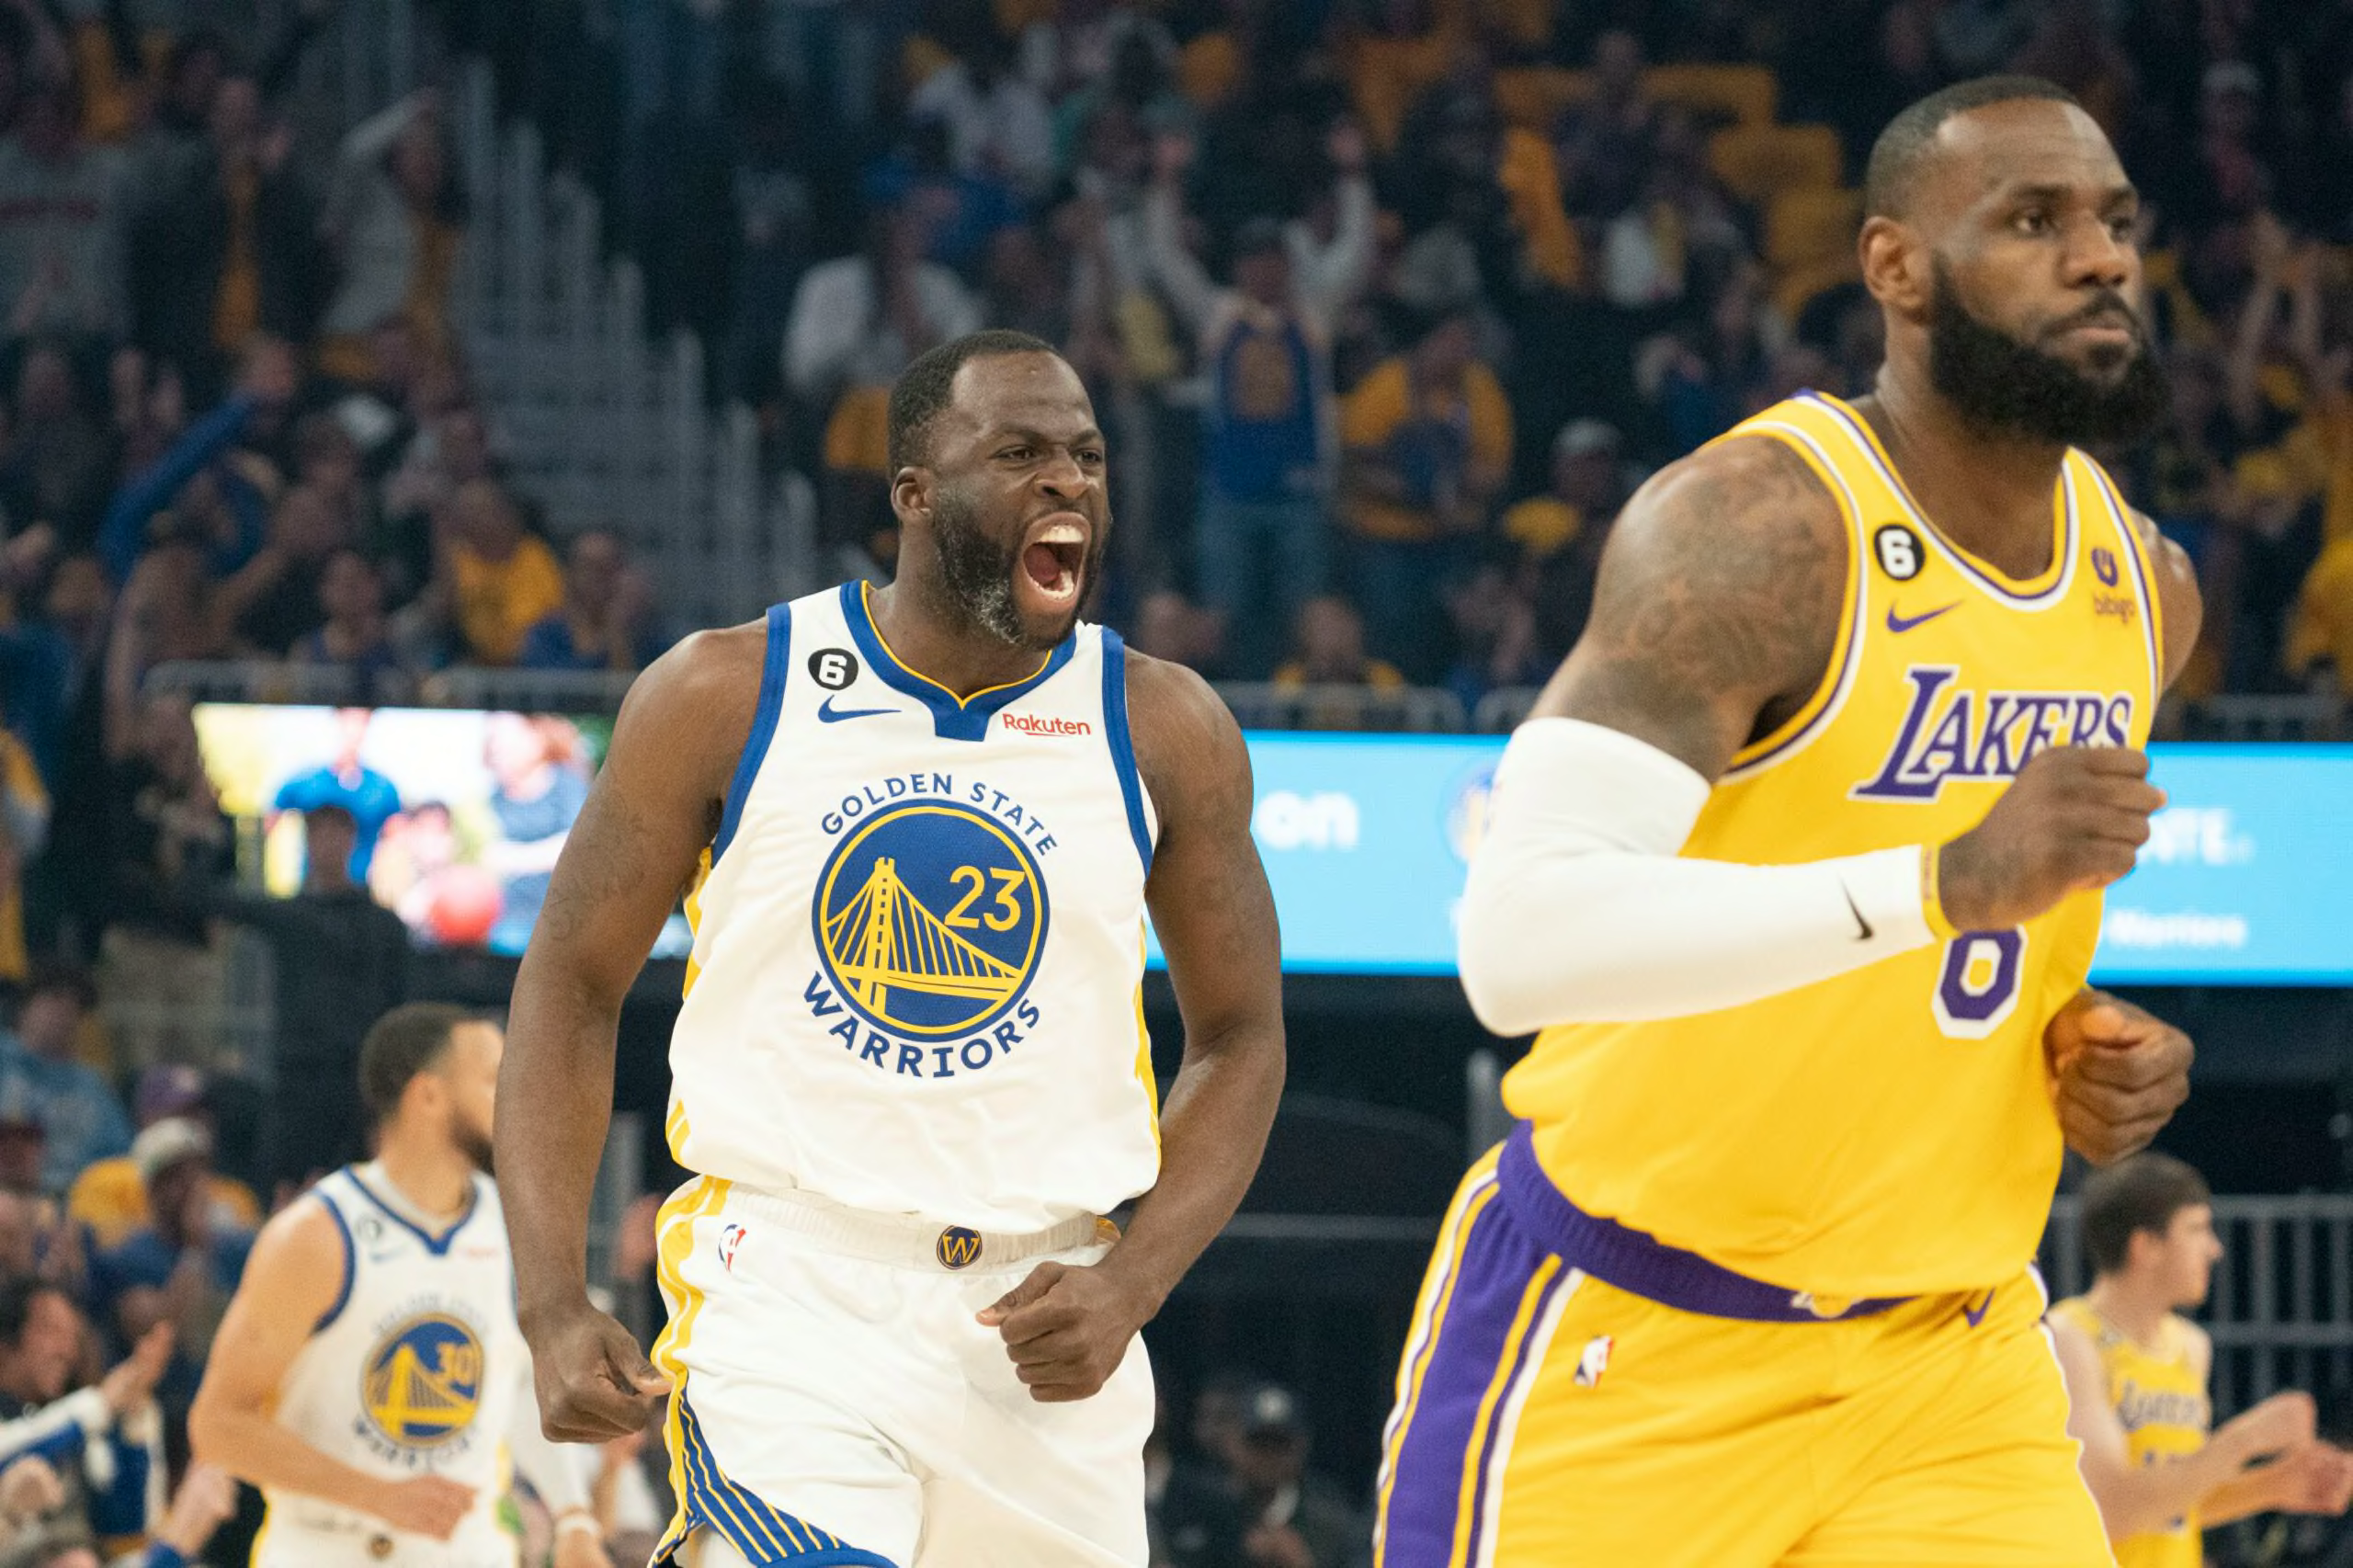 NBA on X: Before the Warriors and Lakers clash on the court next